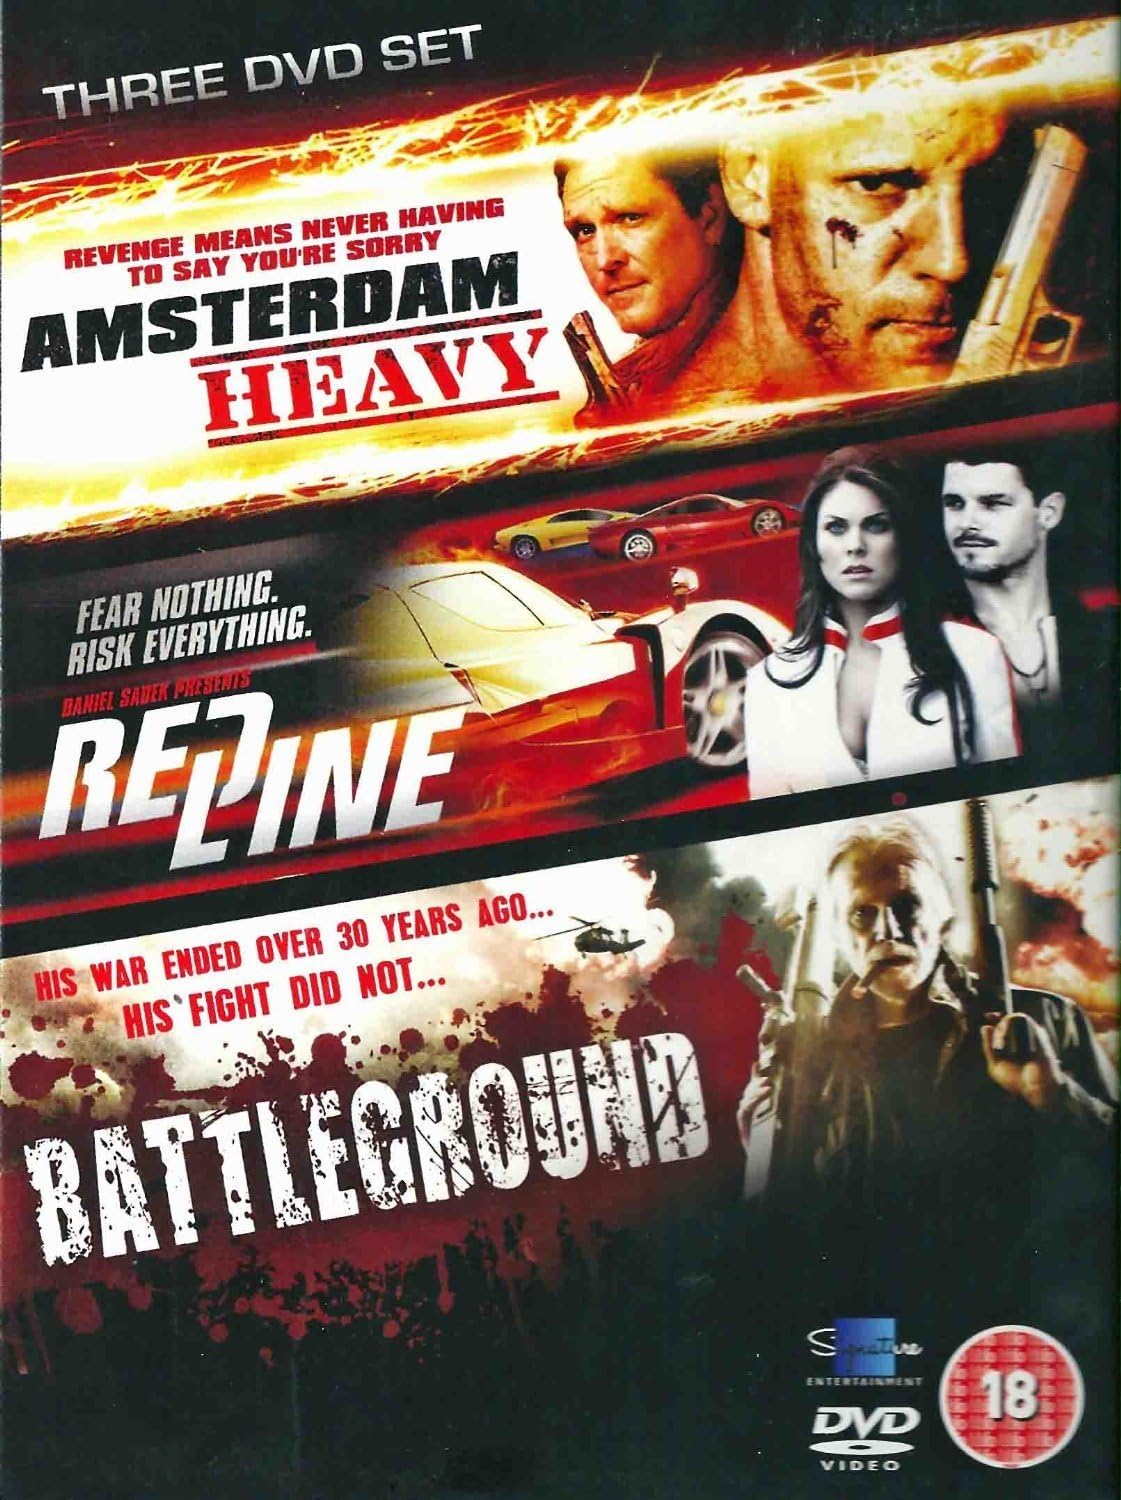 Amsterdam Heavy / Red Line / Battleground Triple DVD Set Rated 18 (2012) RRP £4.50 CLEARANCE XL £1.99